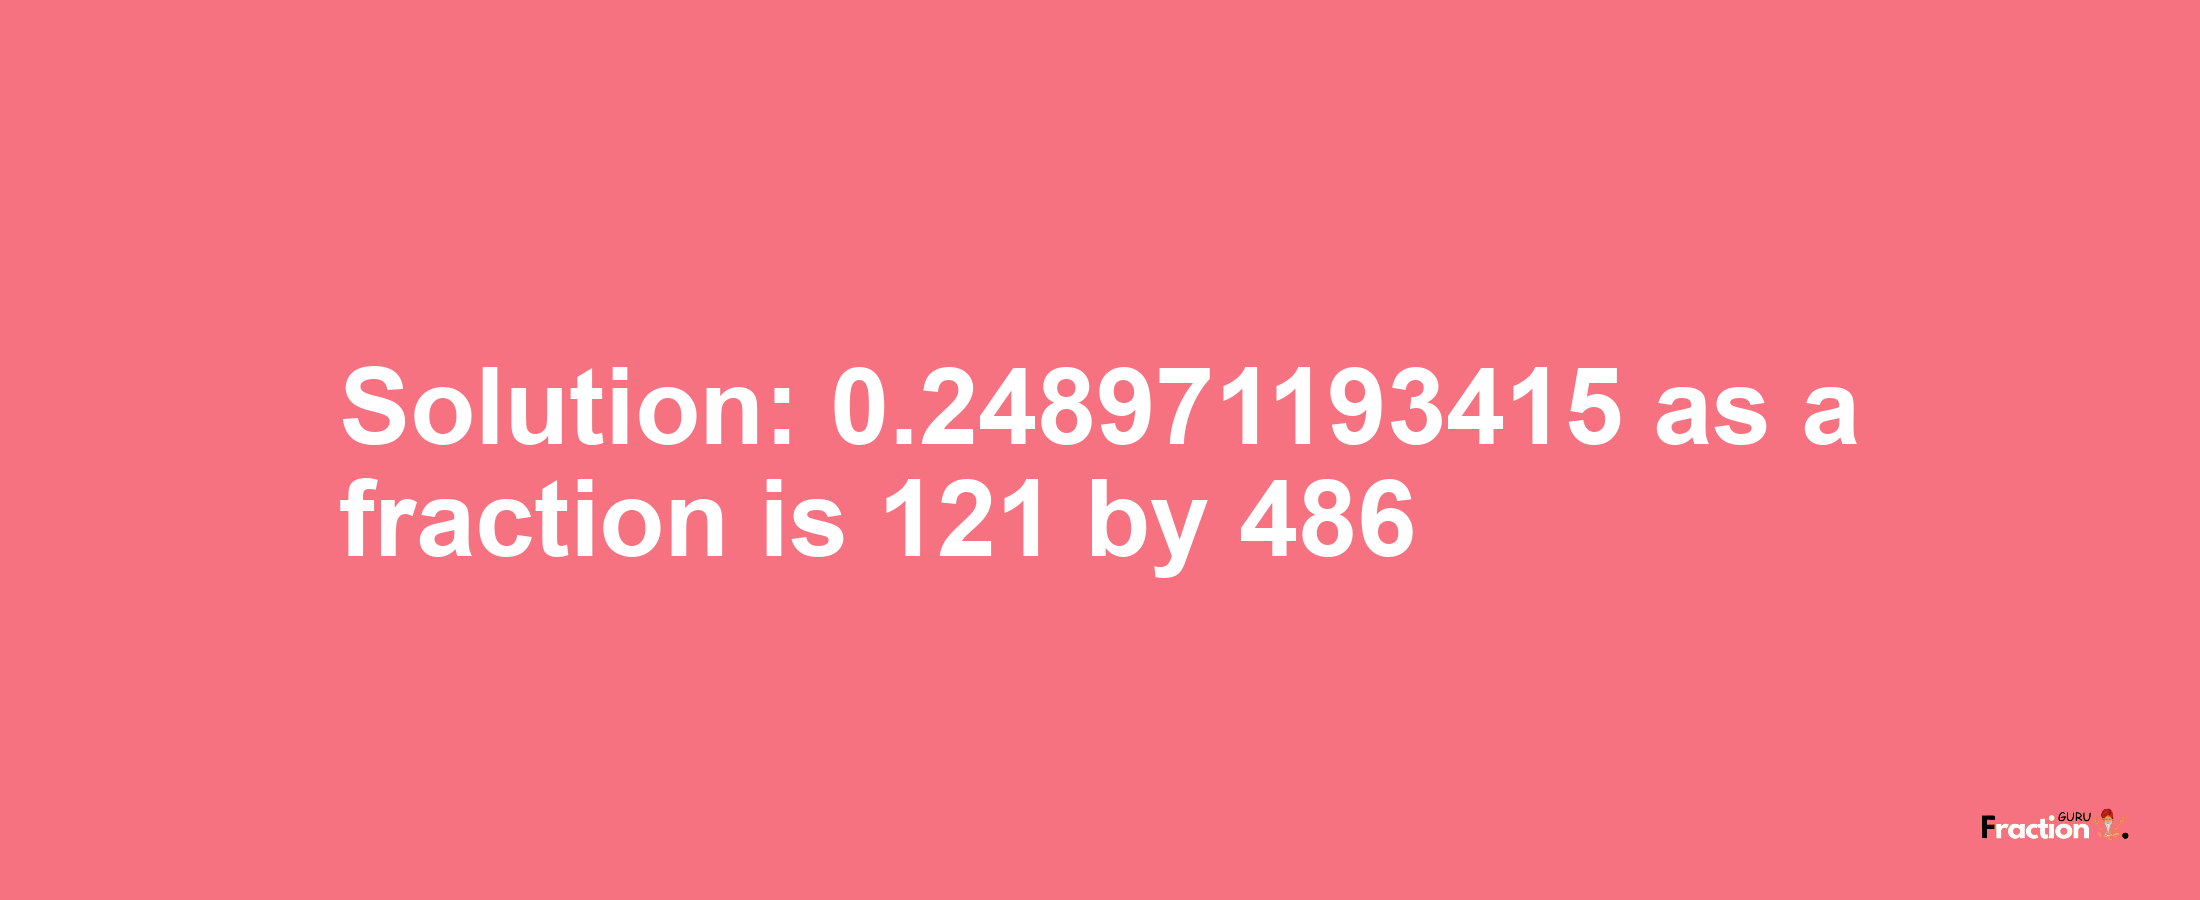 Solution:0.248971193415 as a fraction is 121/486